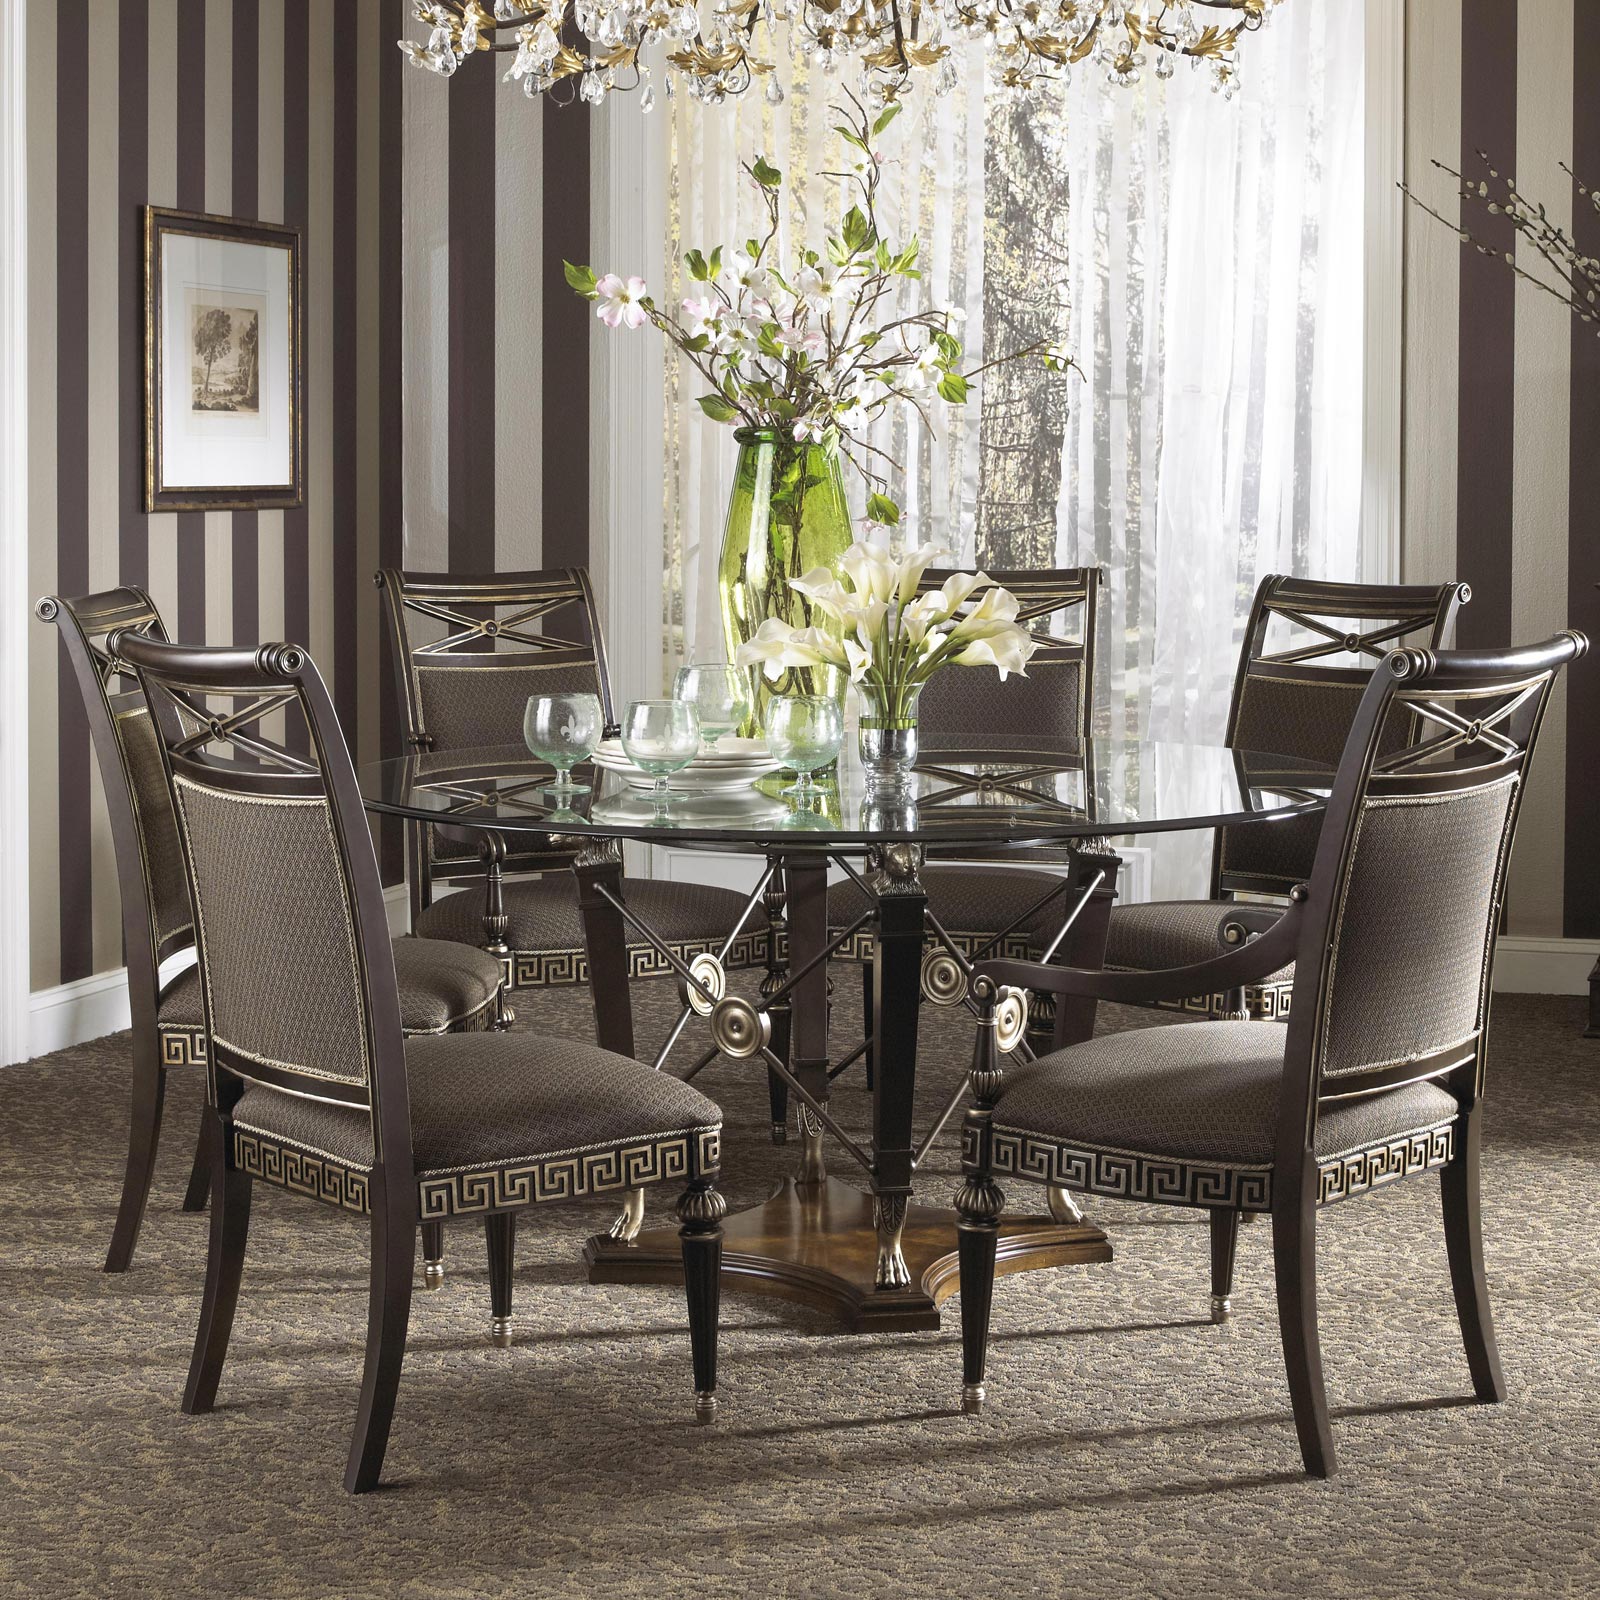 Contemporary Dining Formal Inspiring Contemporary Dining Room With Formal Dining Room Sets Furnished By Glass Round Table Completed With Chairs And Decorated With Green Vase Flowers Dining Room Formal Dining Room Sets For Contemporary Interiors